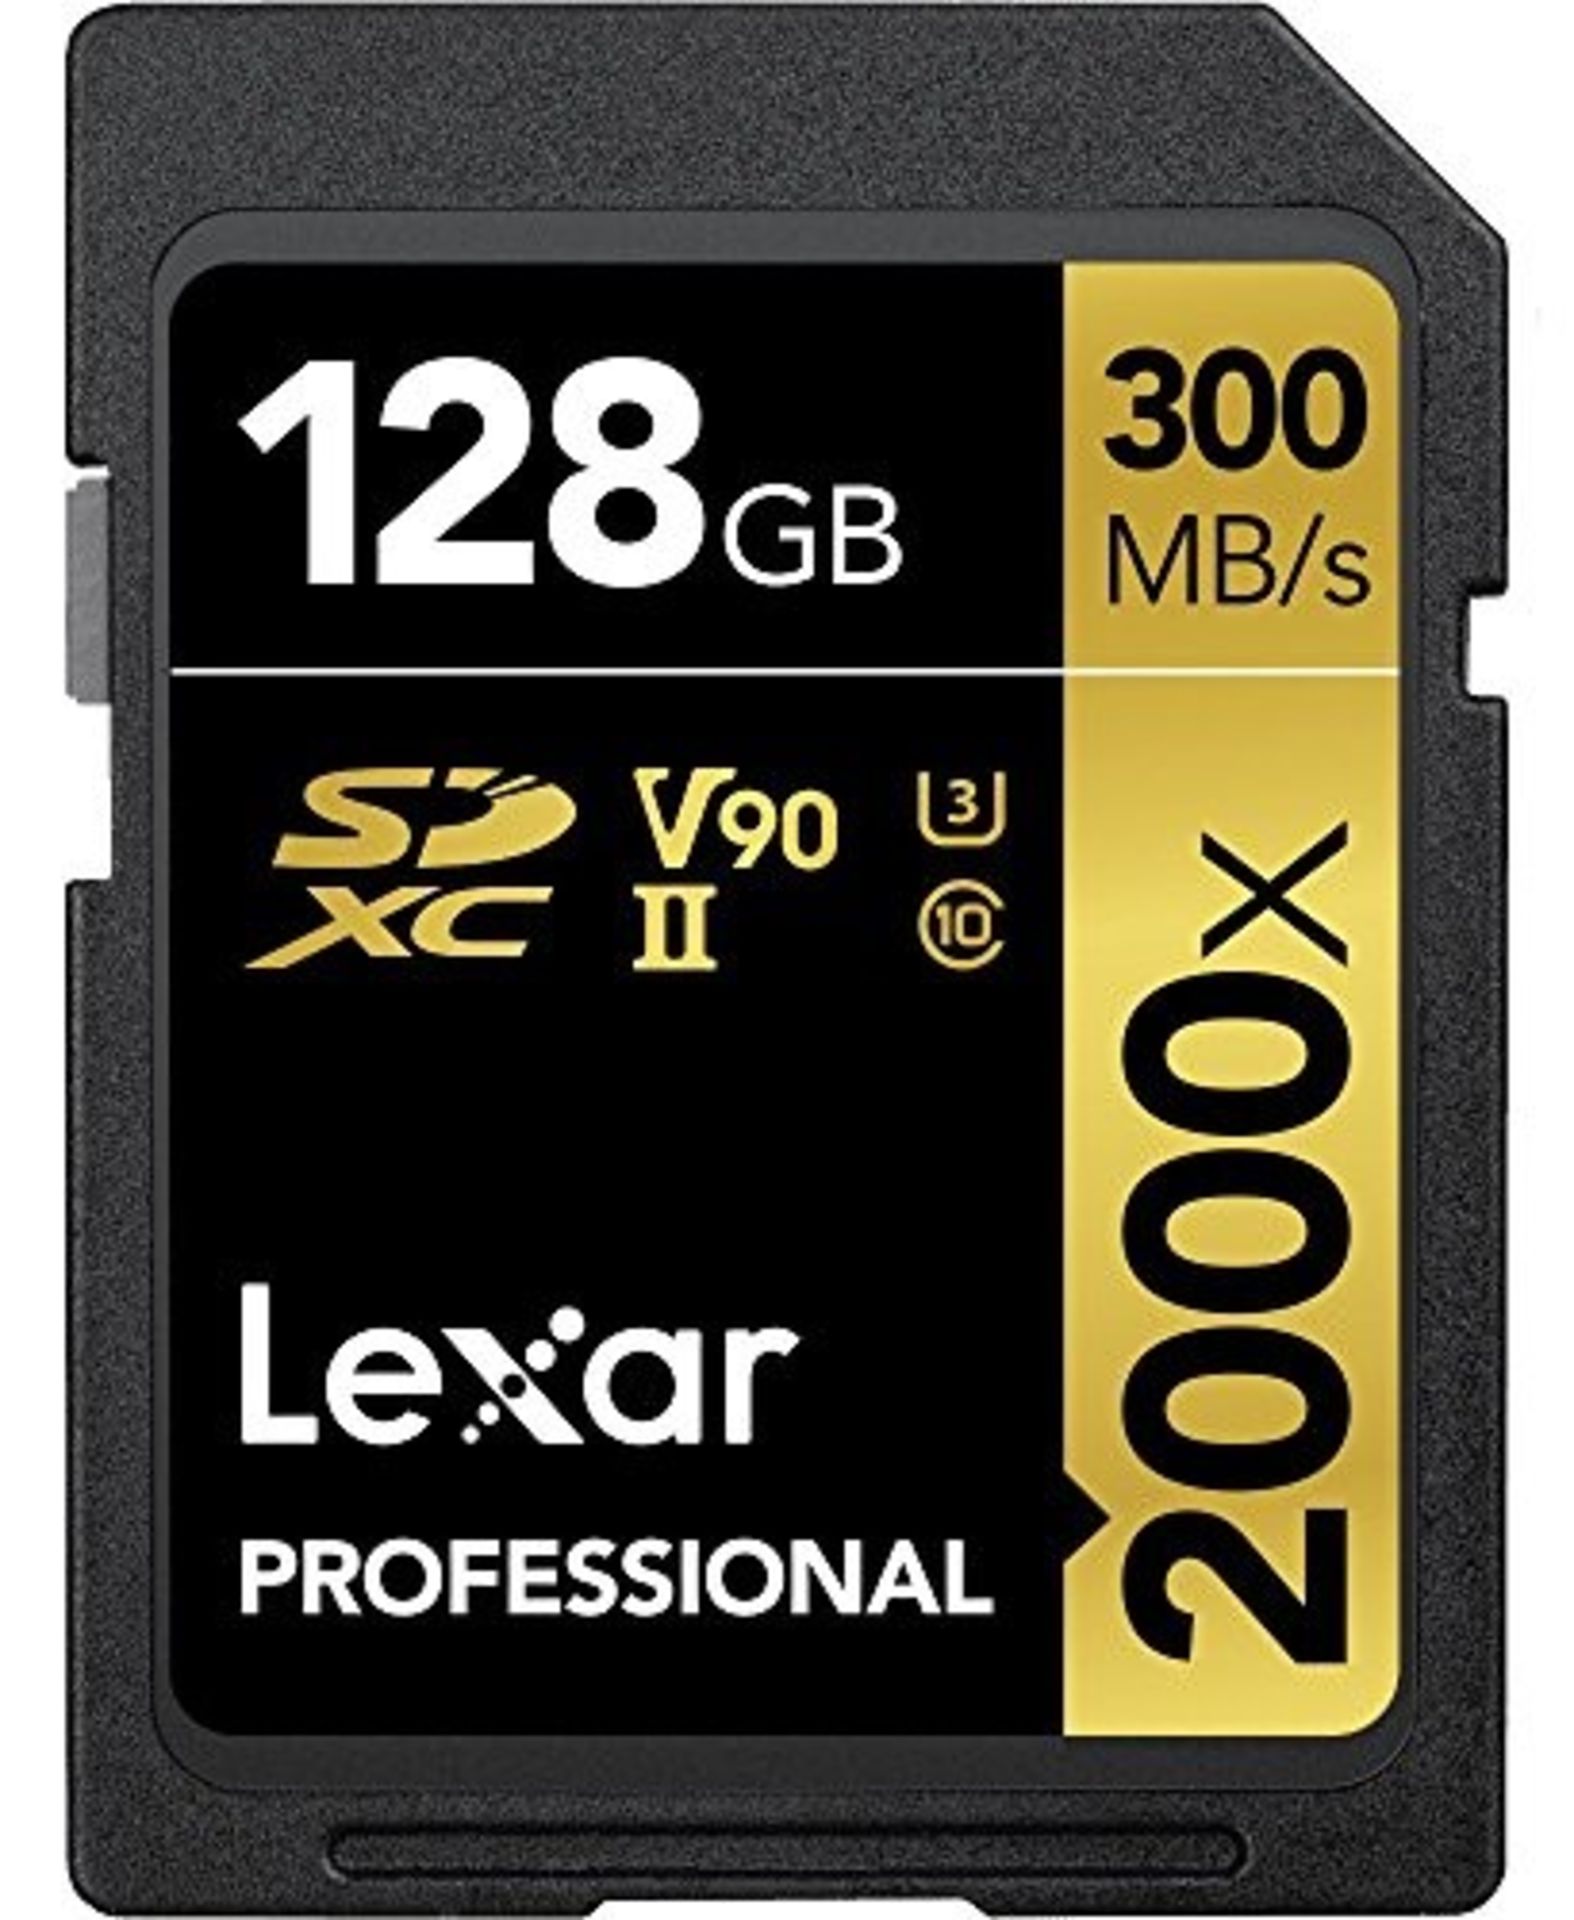 RRP £168.00 Lexar Professional 2000x 128 GB SDXC UHS-II Card w/o Reader, Up To 300MB/s Read (LSD20